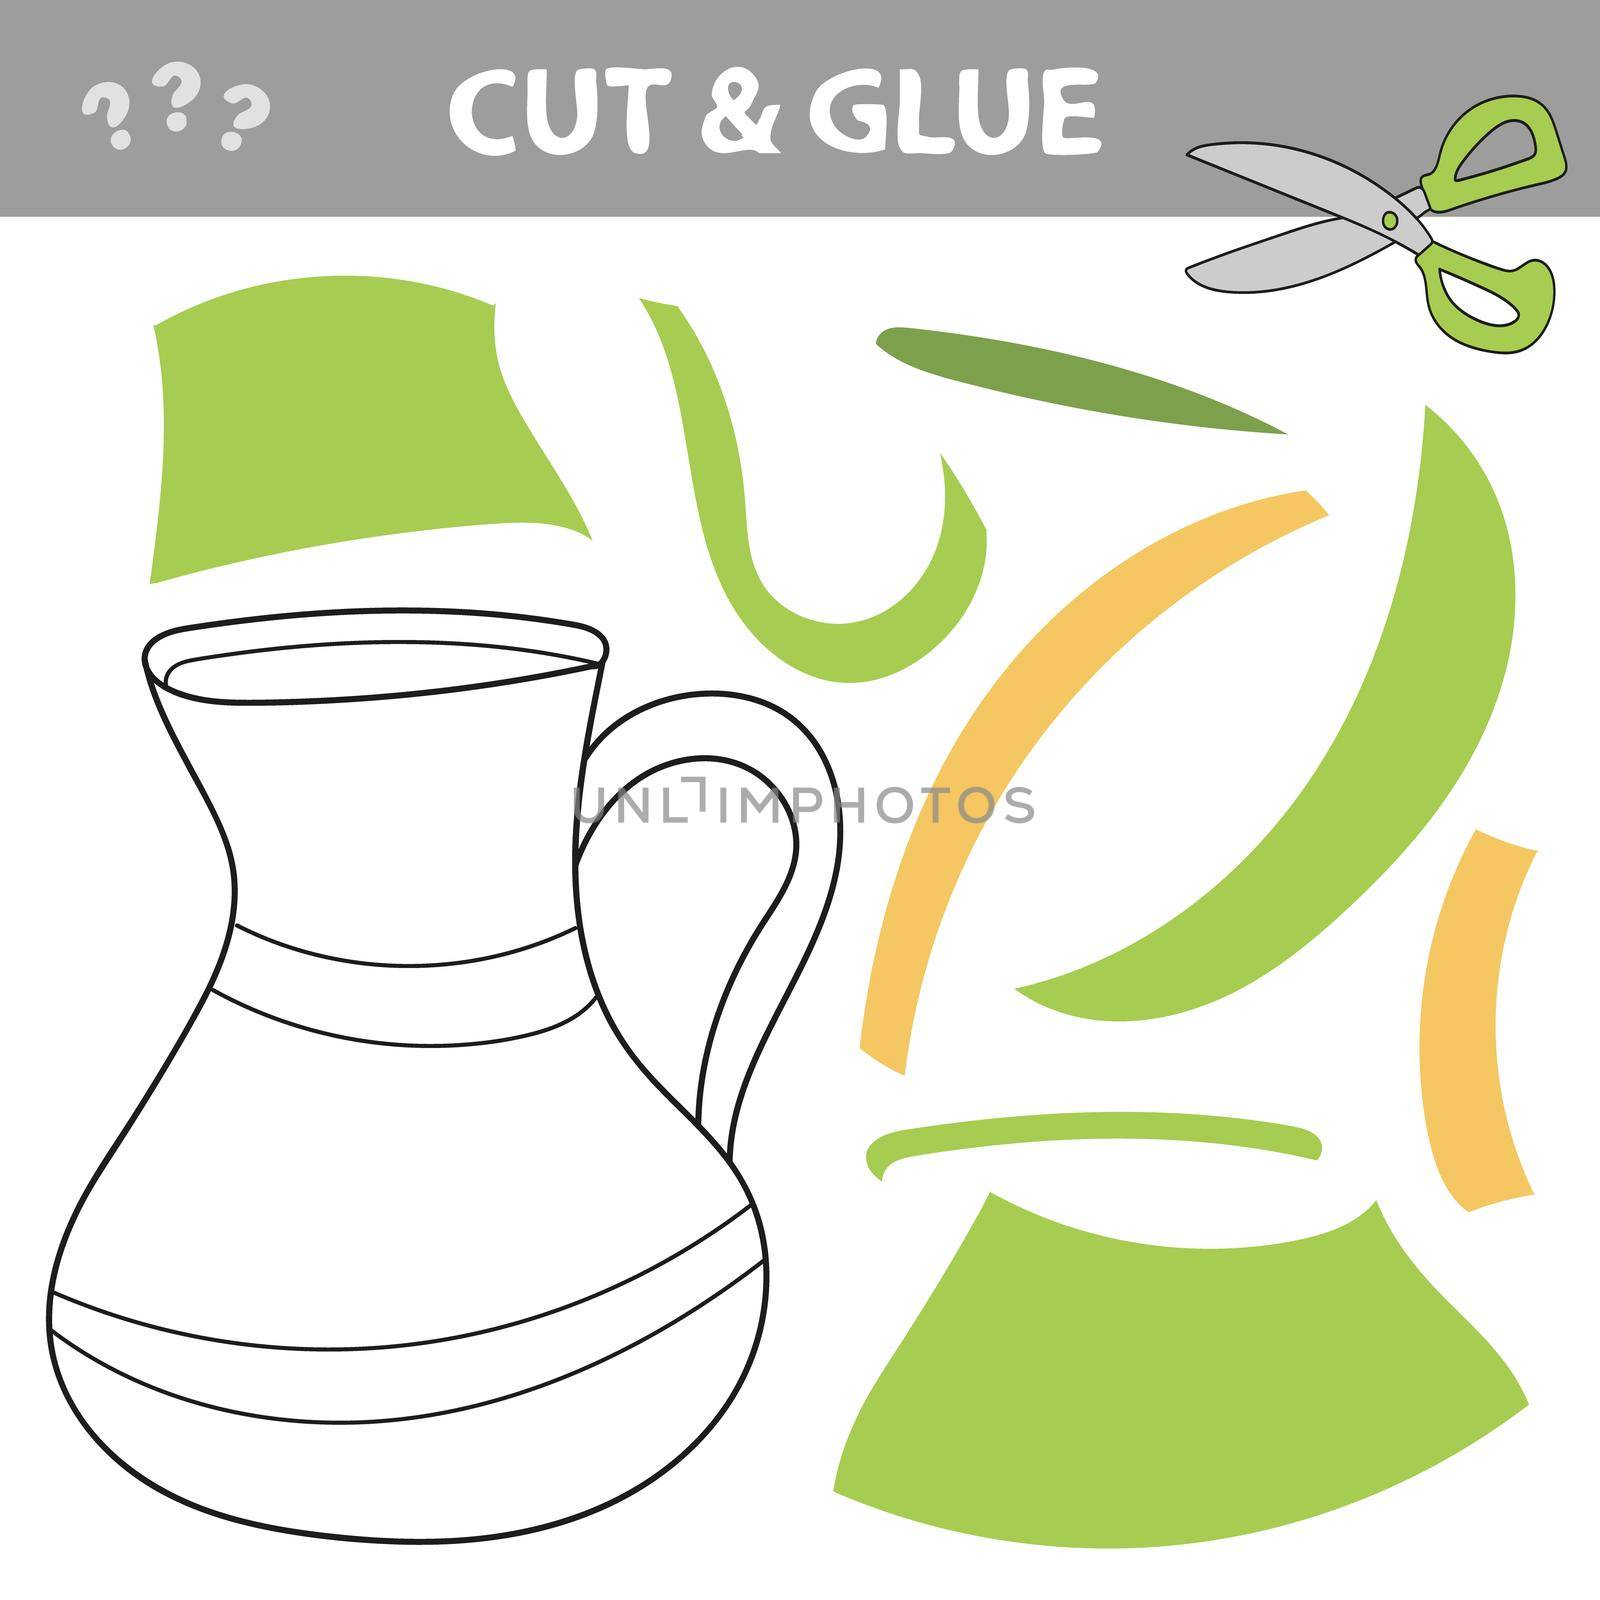 Cut and glue - Simple game for kids. Easy educational paper game for kids. Simple kid application with Funny Clay Pot. Puzzle with green jug.